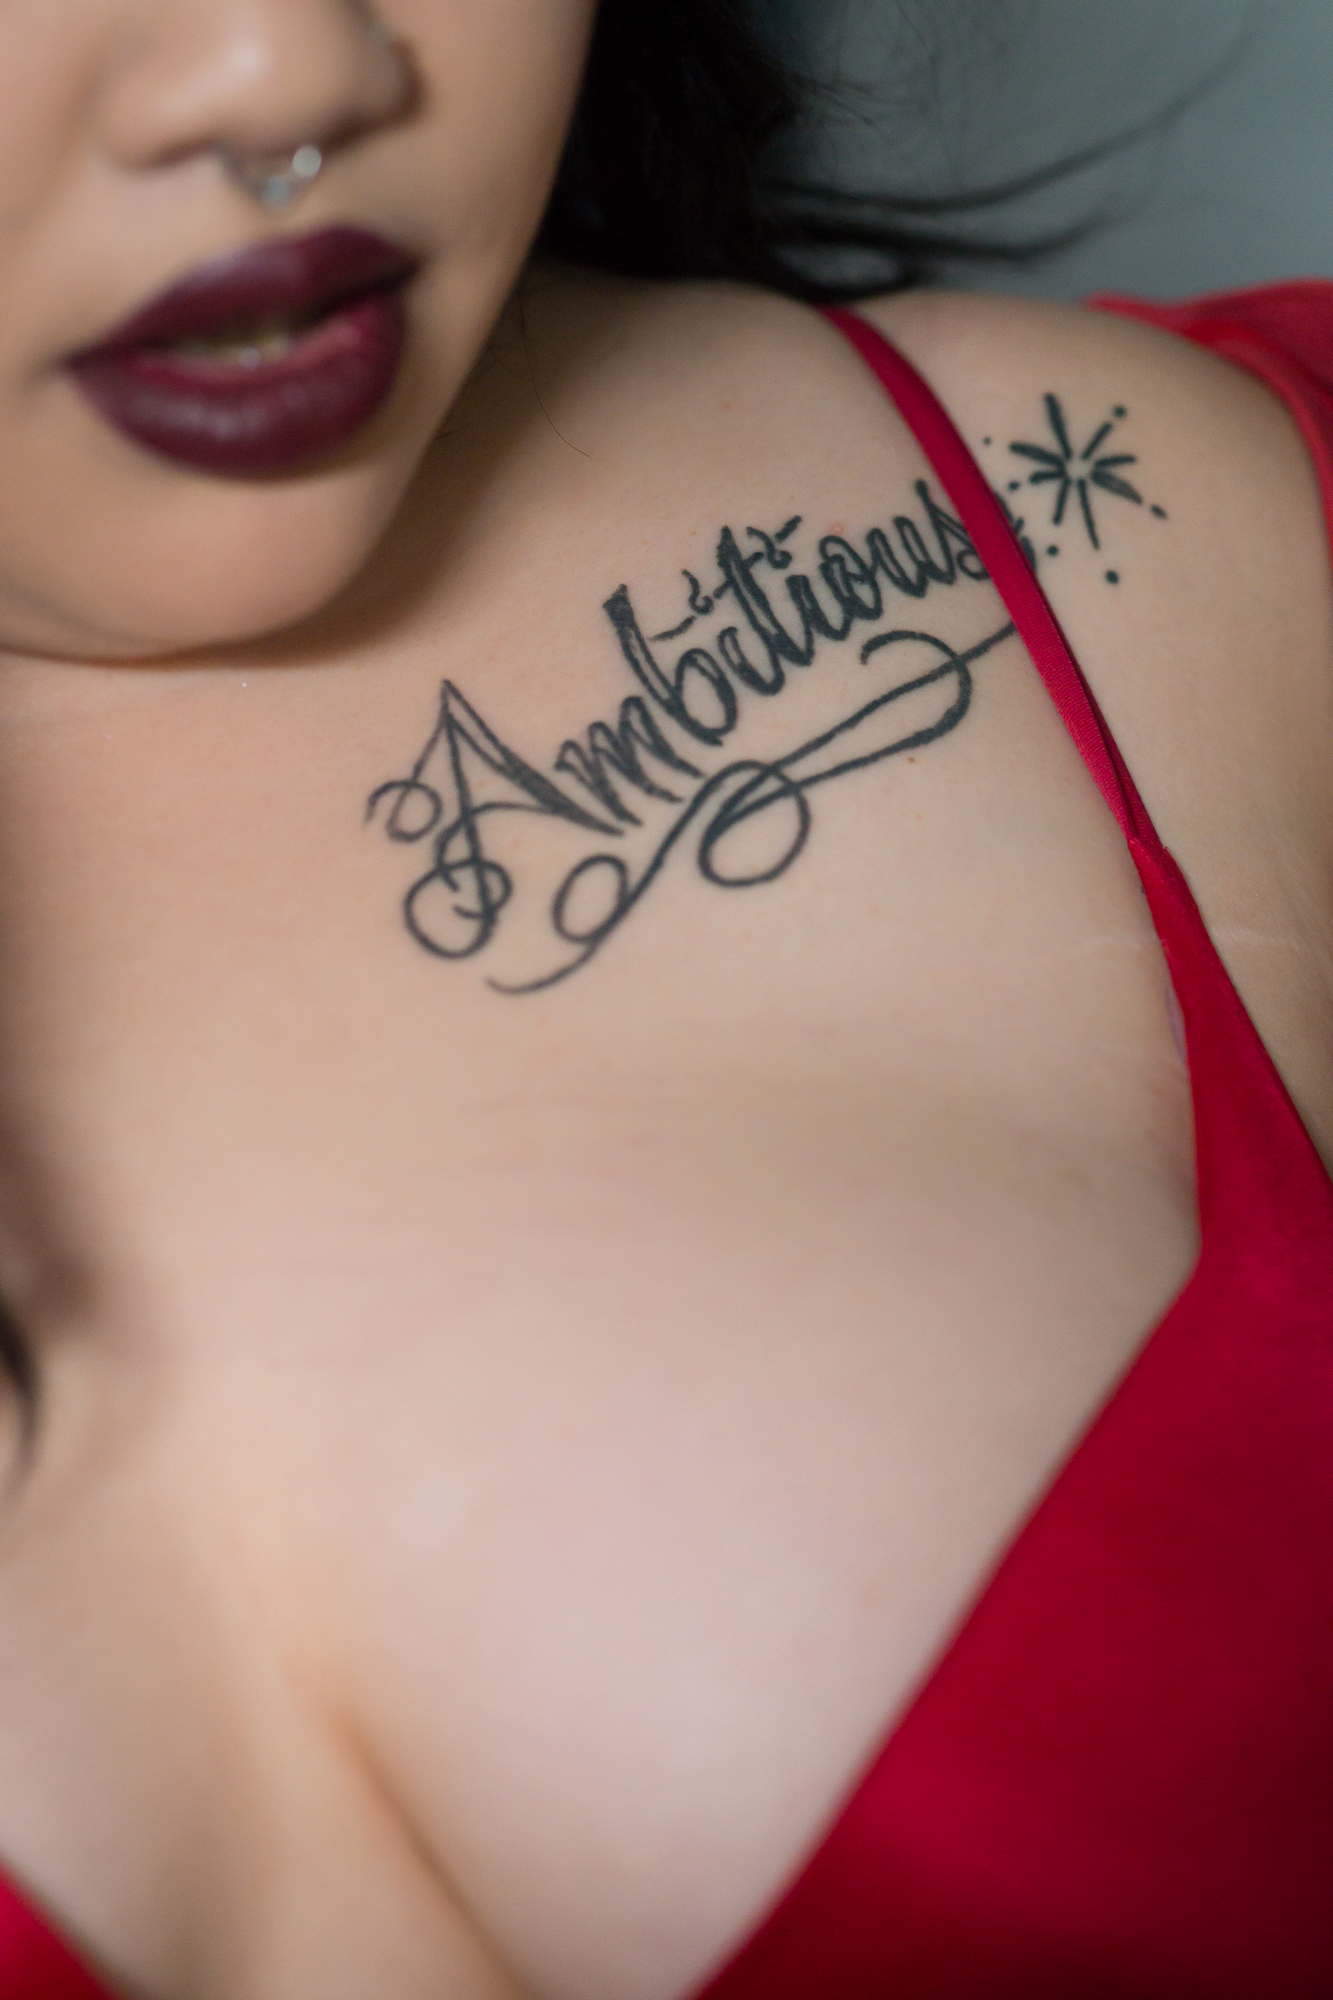 A Black woman wearing dark lipstick poses in red lingerie, with a tattoo on her shoulder that reads "Ambitious"